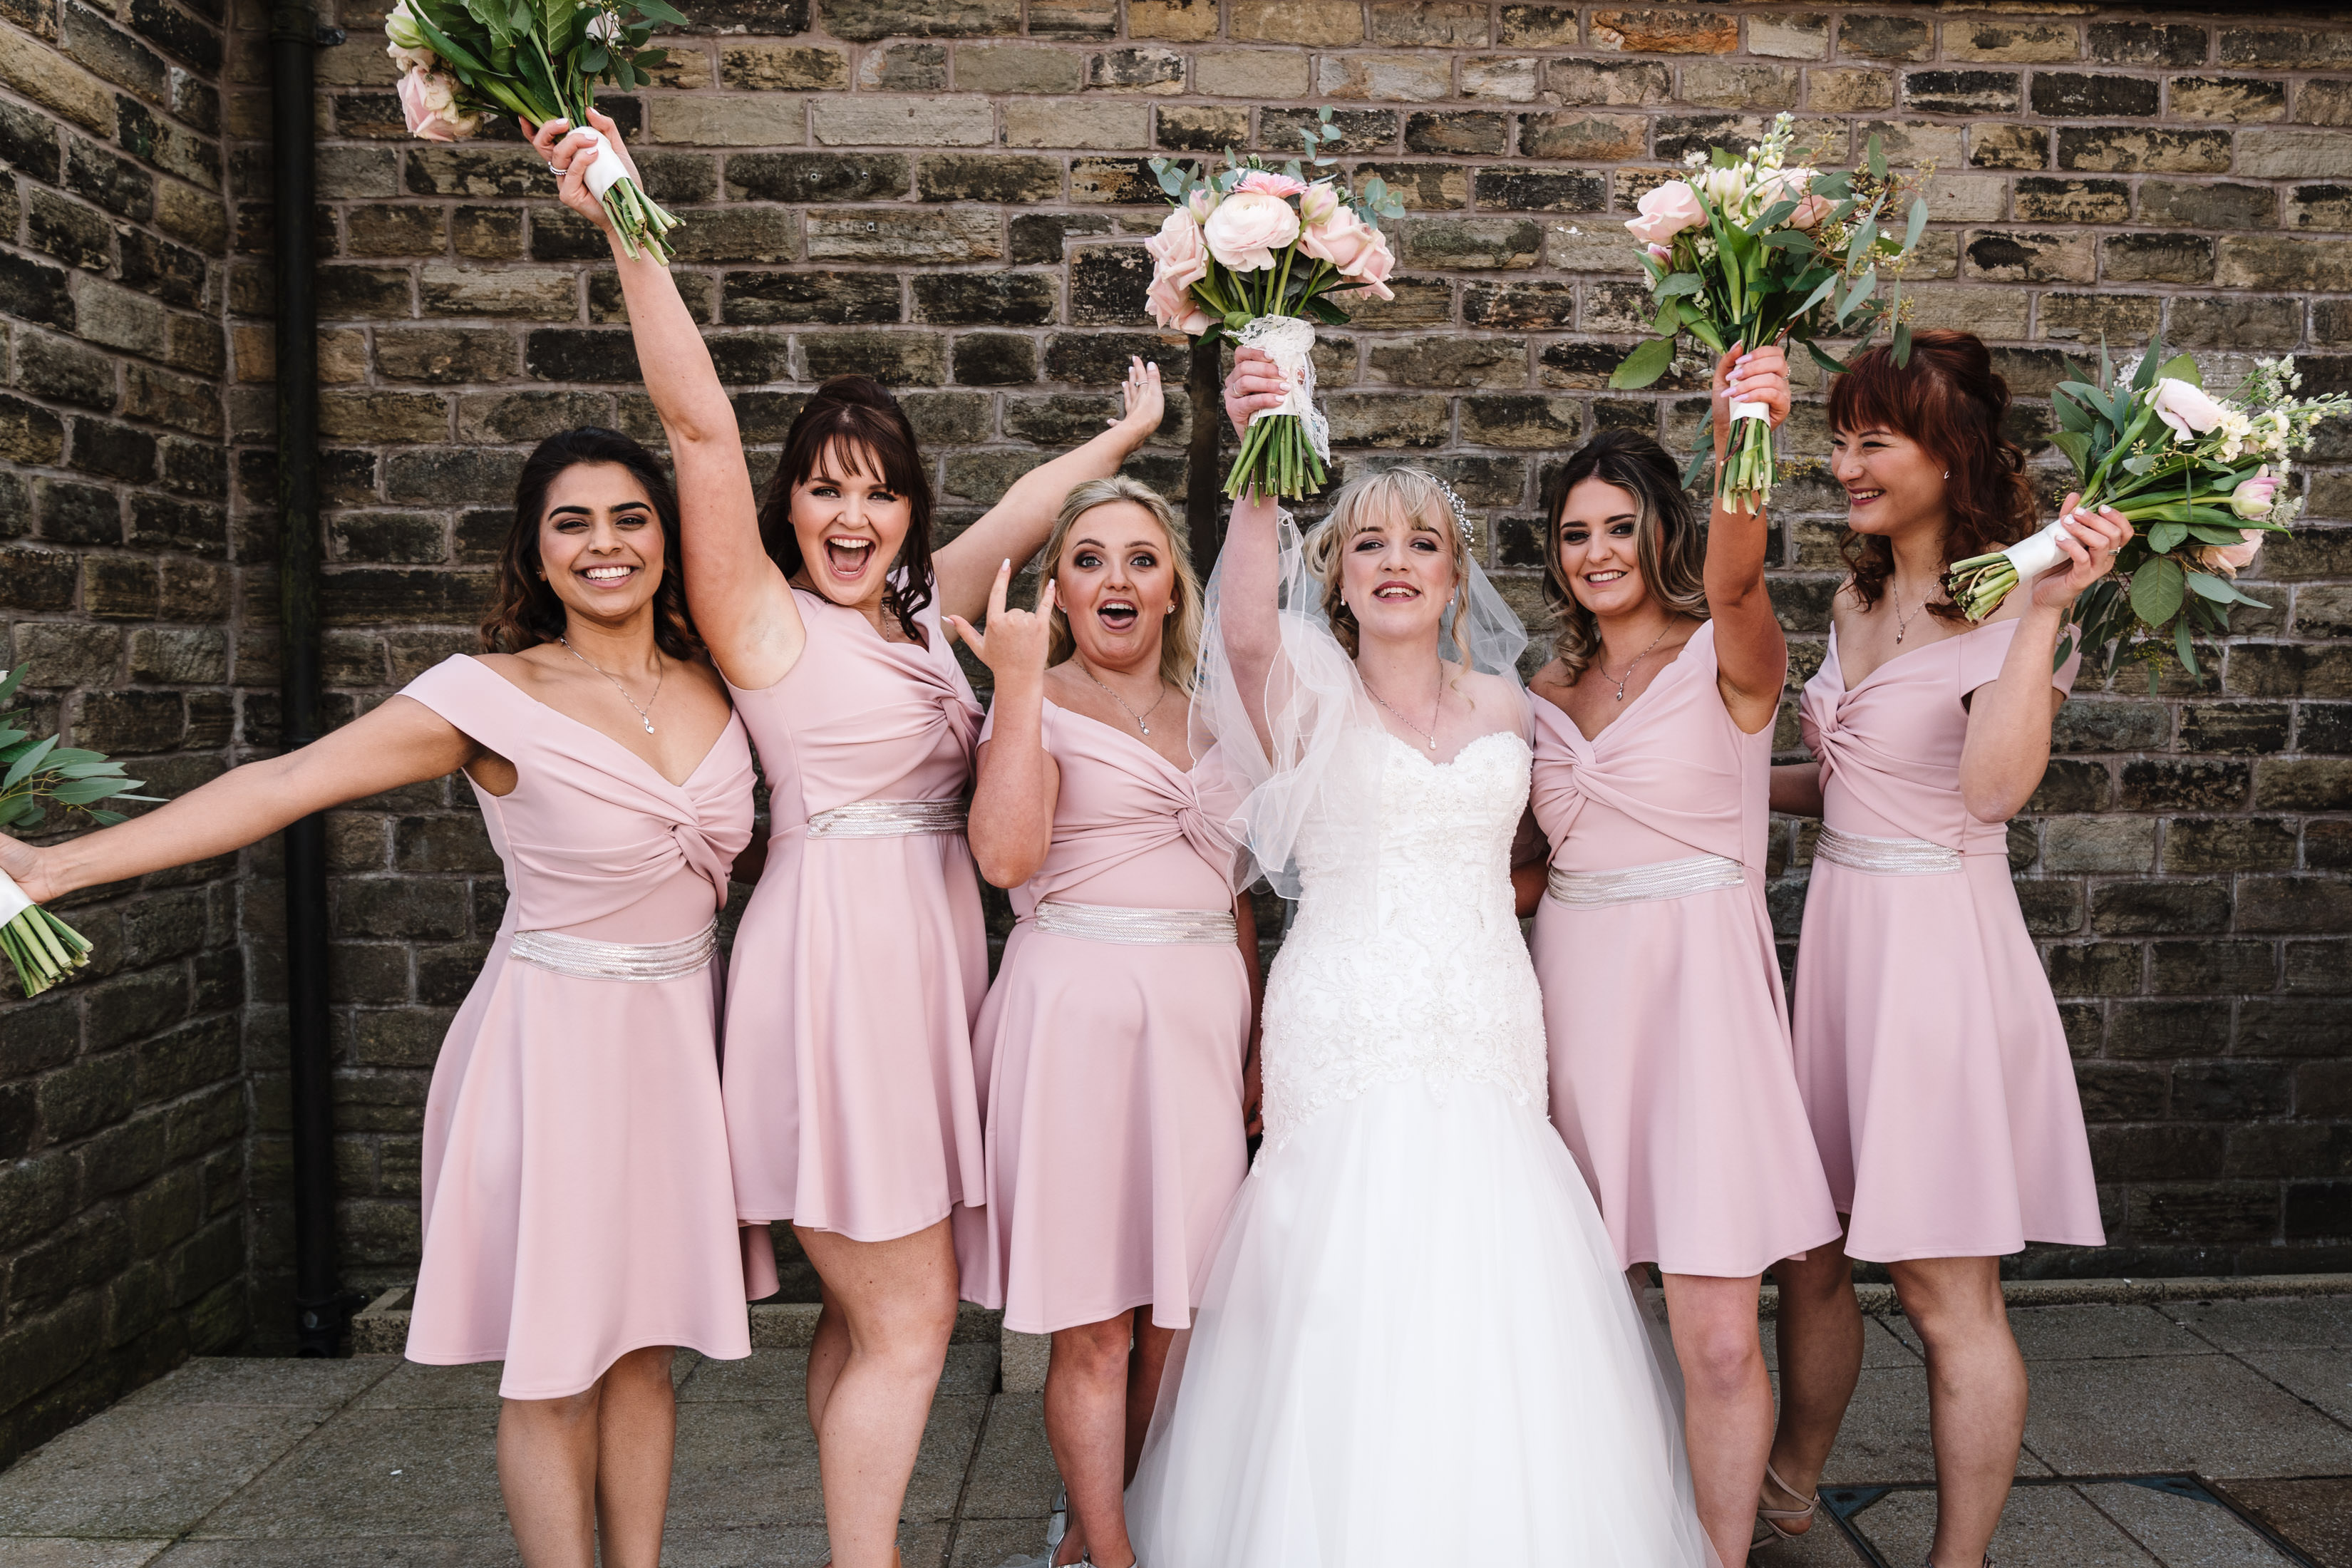 Bridesmaids holding up bouquets and posing for photograph